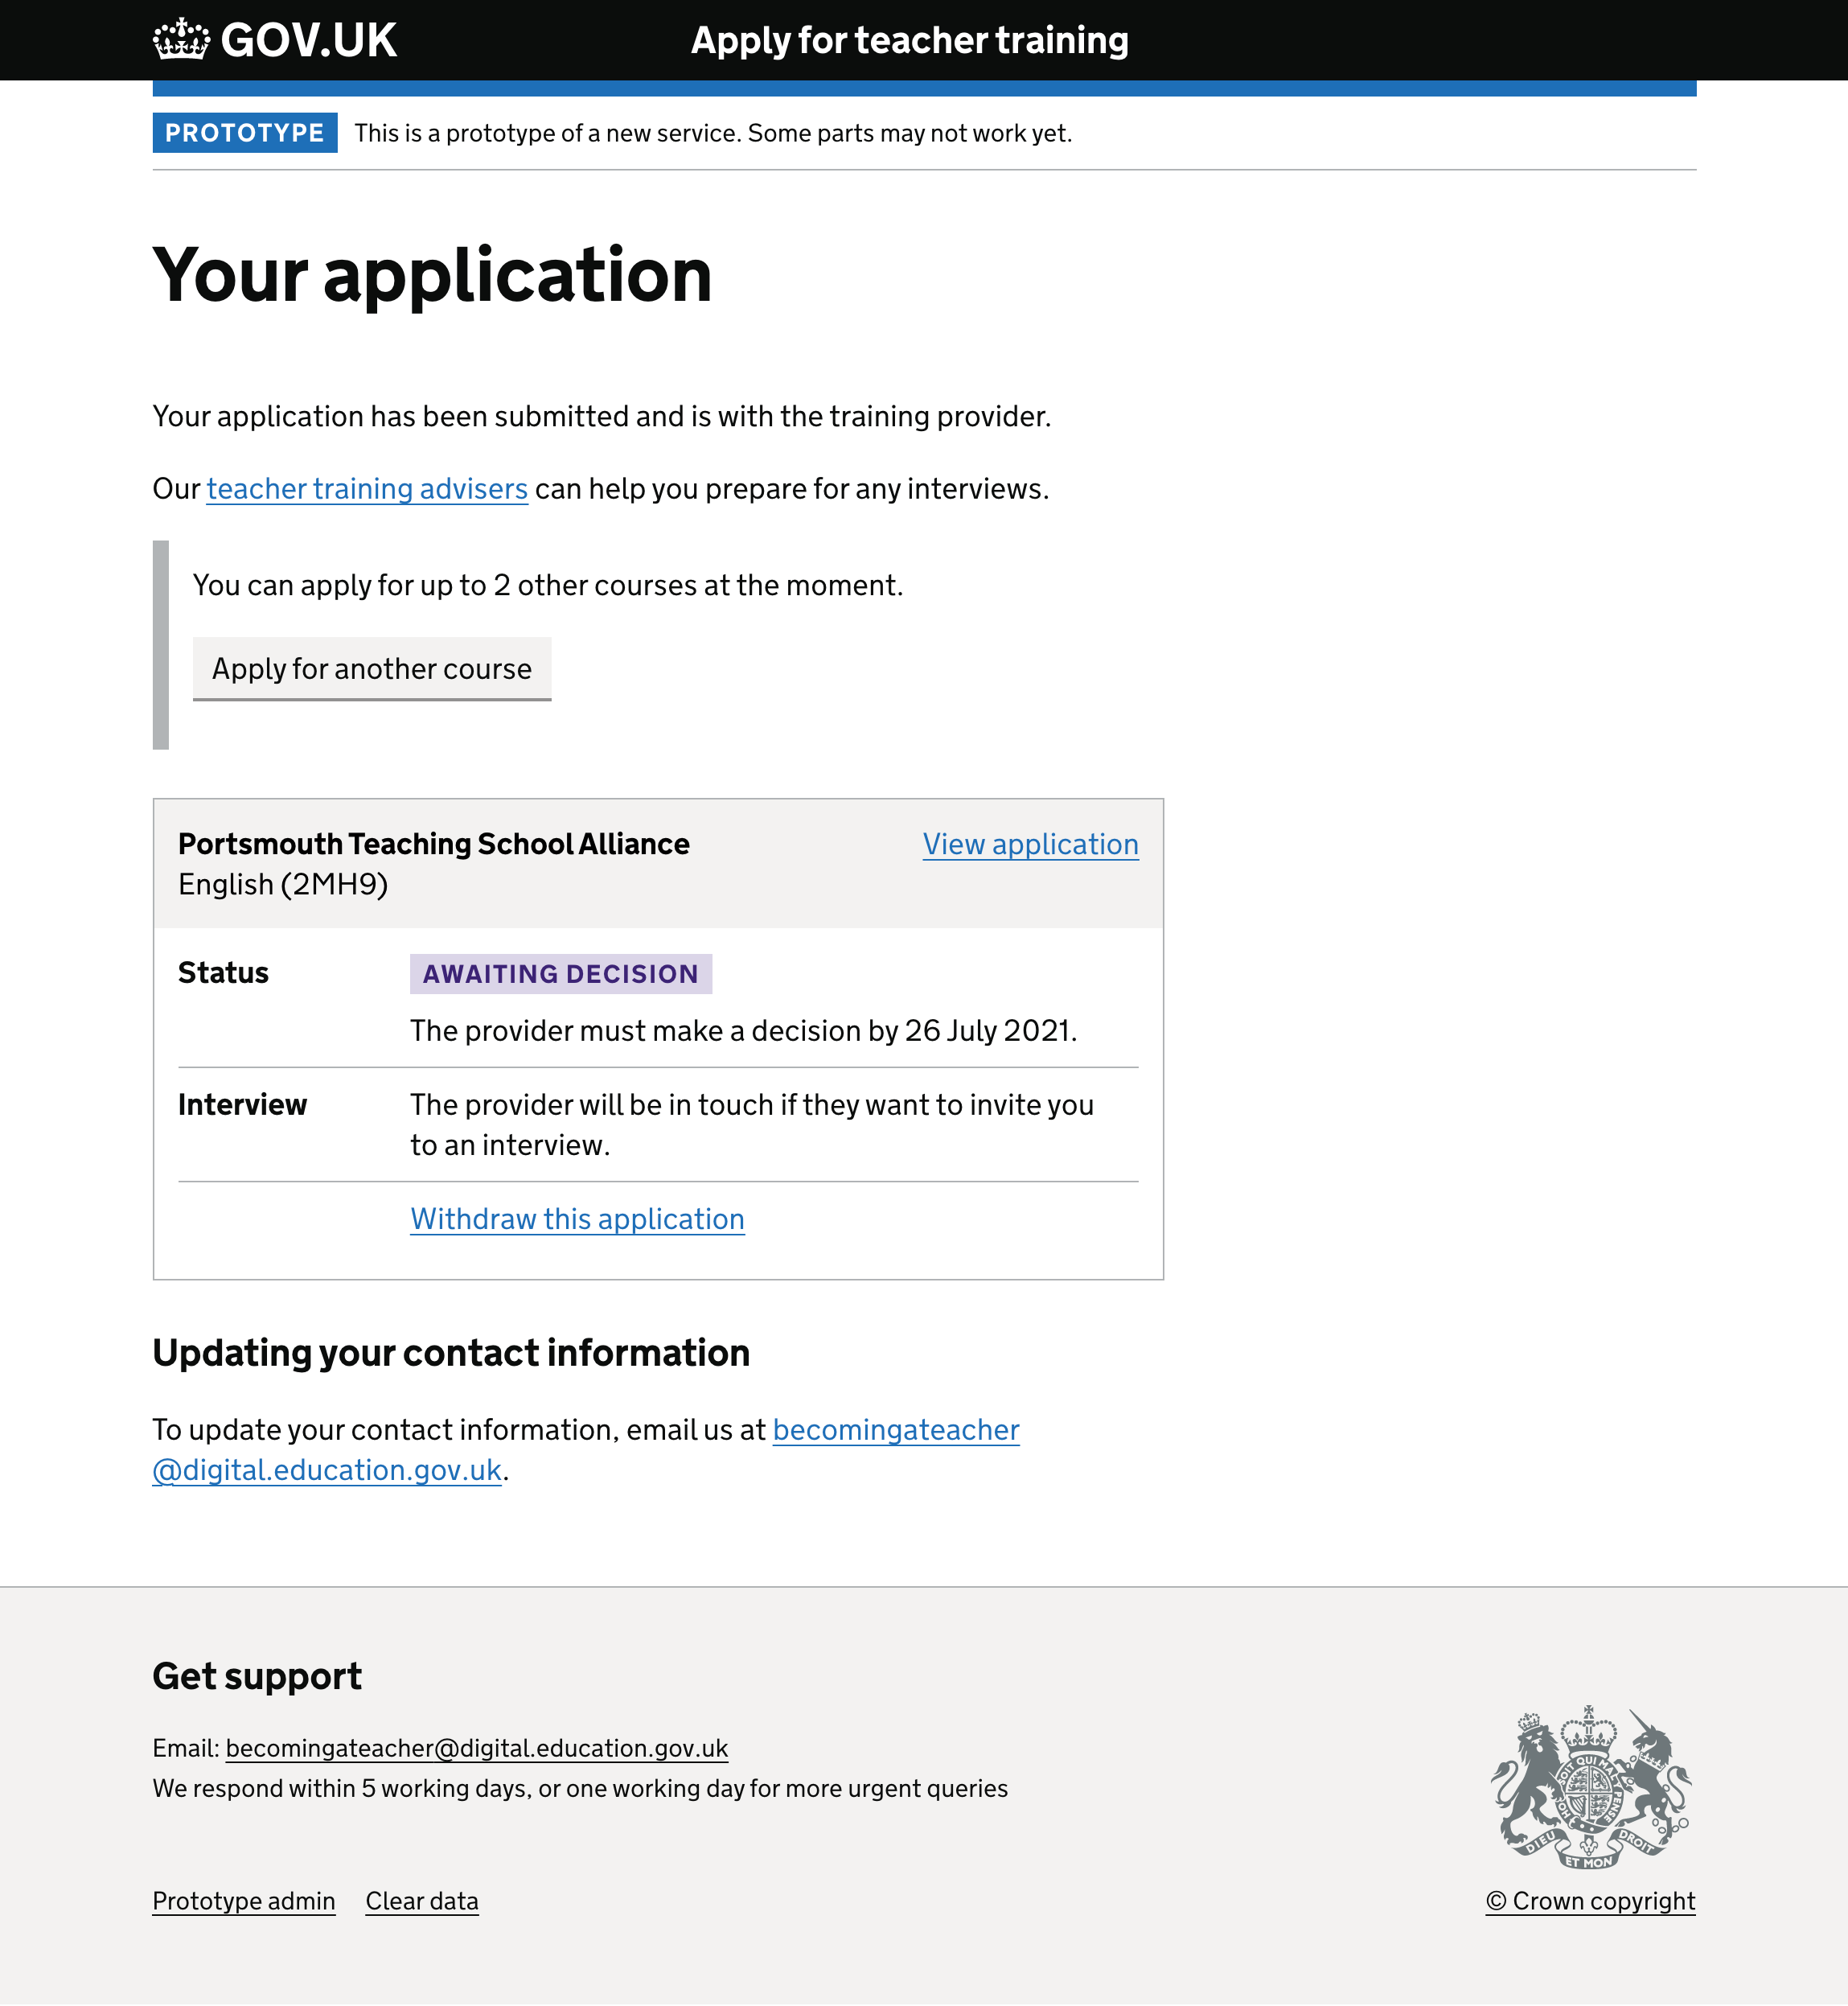 Screenshot of post-submission dashboard showing ‘apply for another course’.